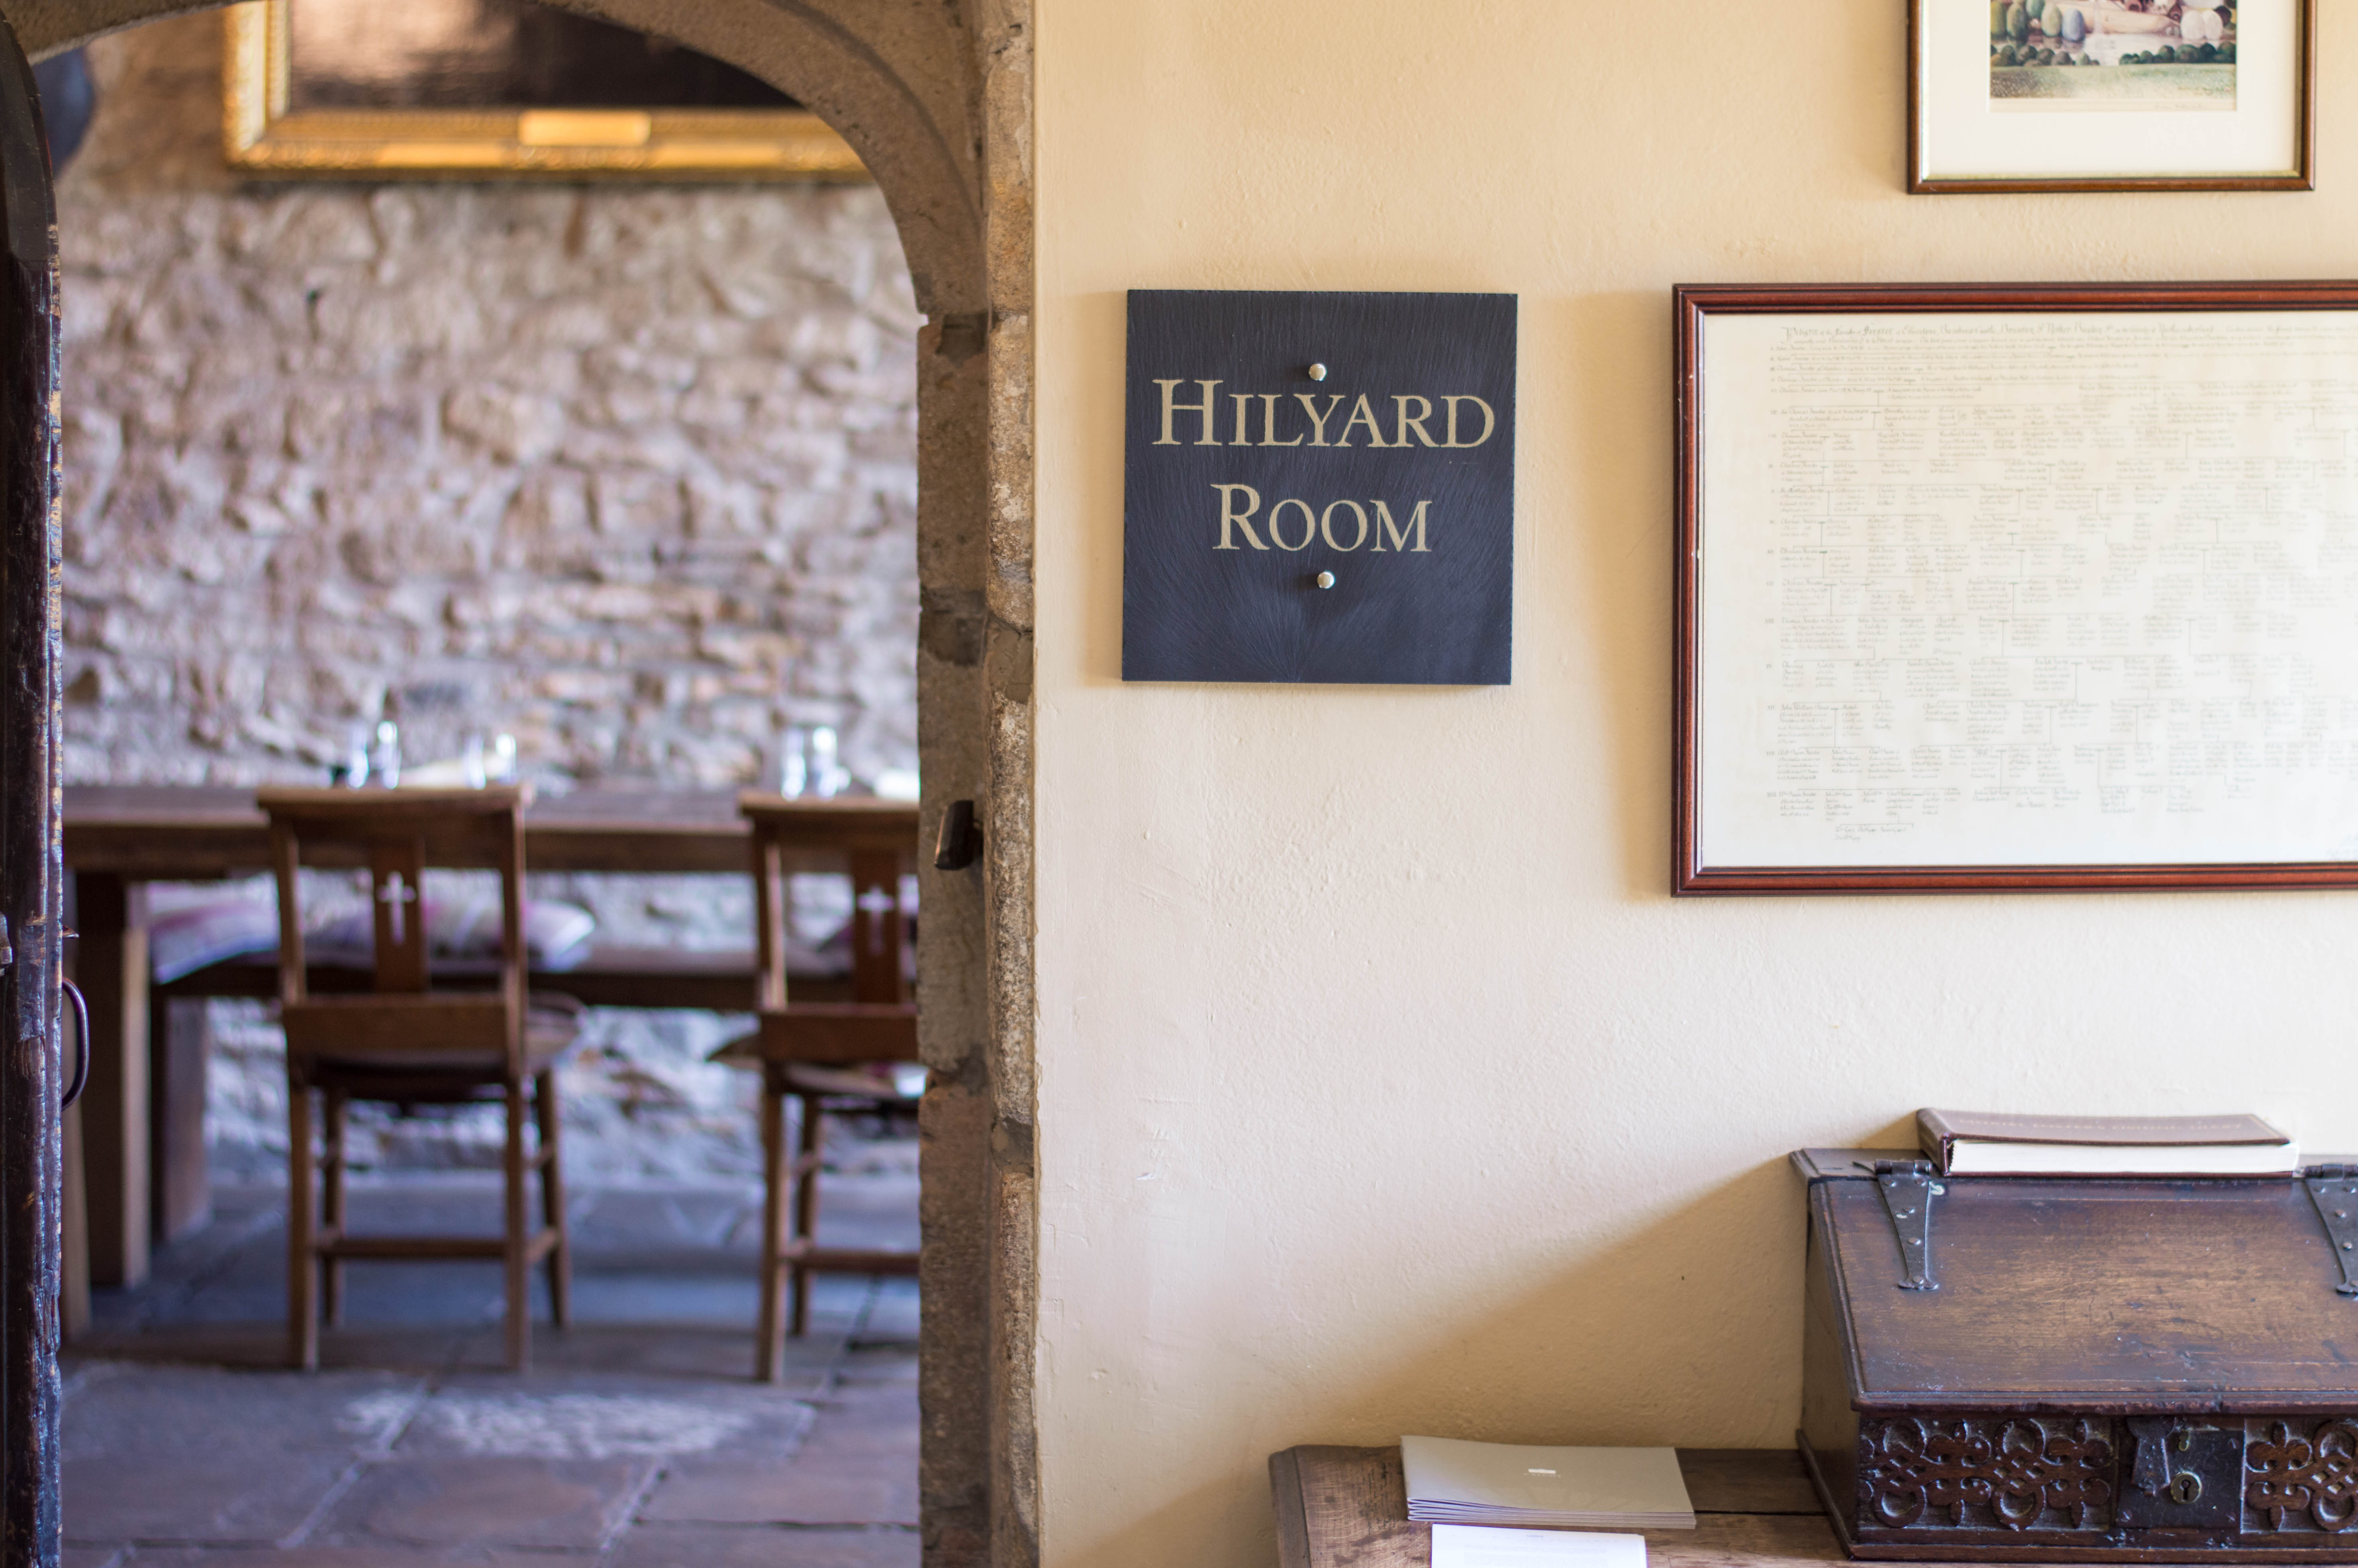 The sign for the Hilyard Room